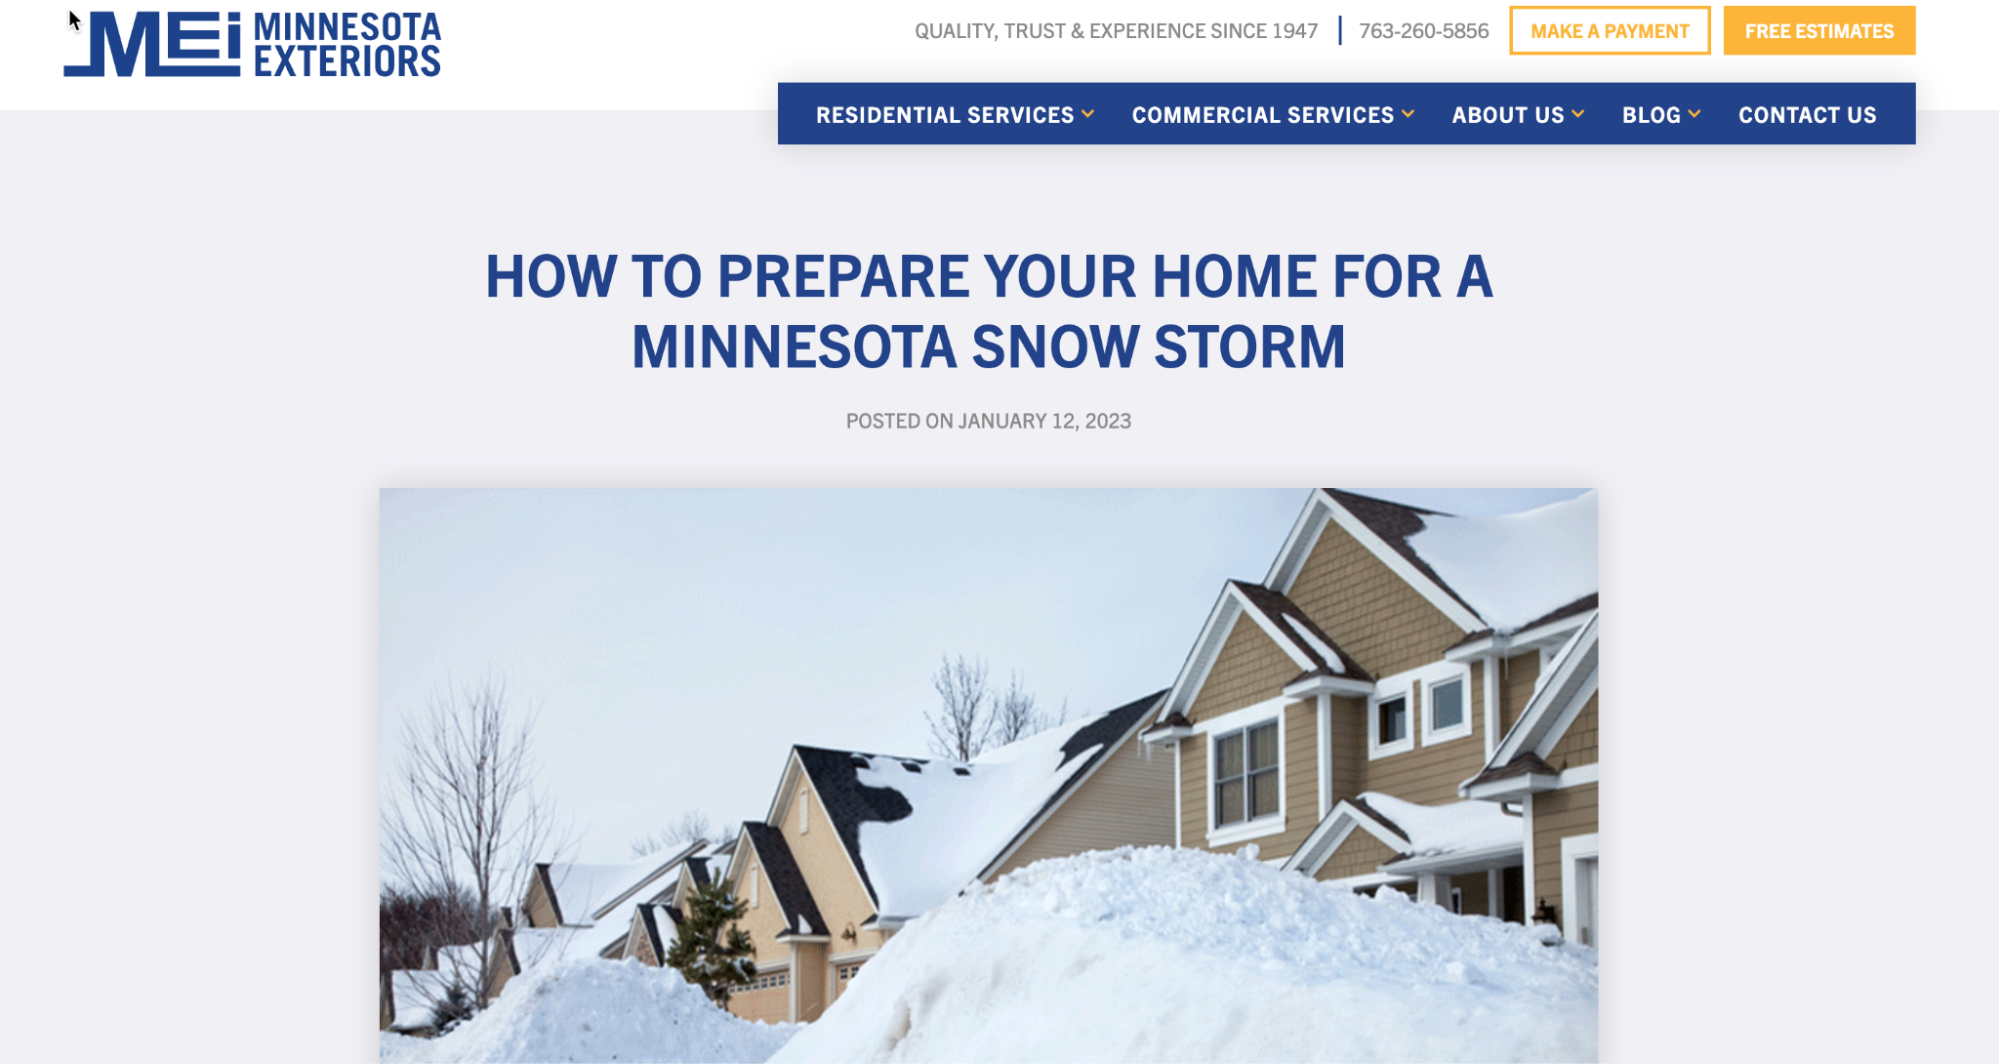 Screen capture of a Minnesota Exteriors' localized blog post that provides essential tips to prepare your home for a snowstorm in Minnesota.